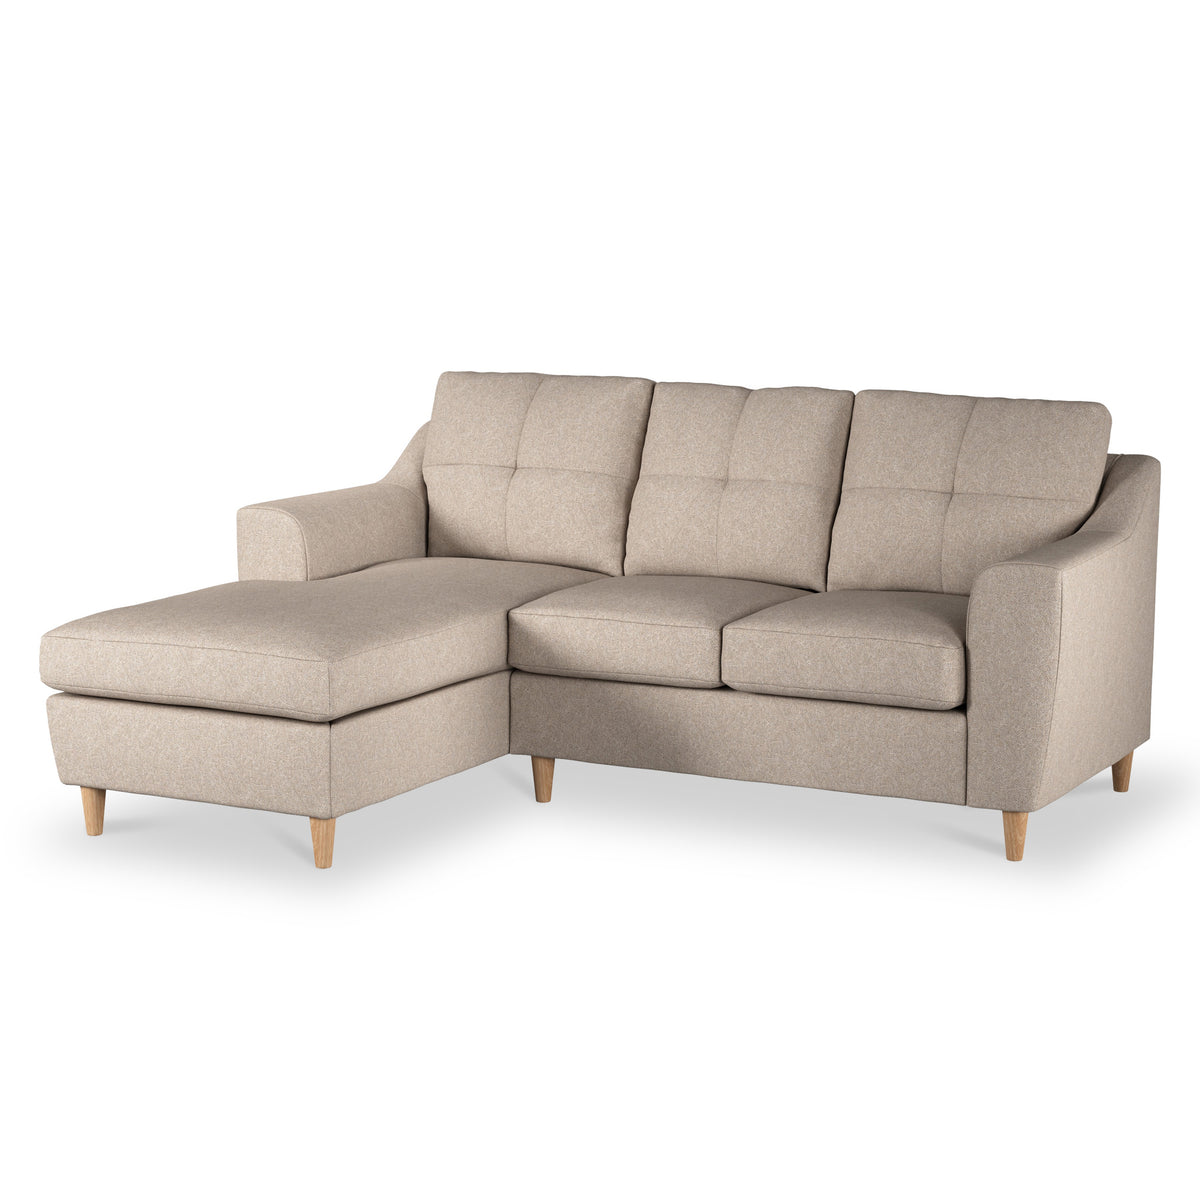 Justin Oatmeal Left Hand Chaise Sofa from Roseland Furniture